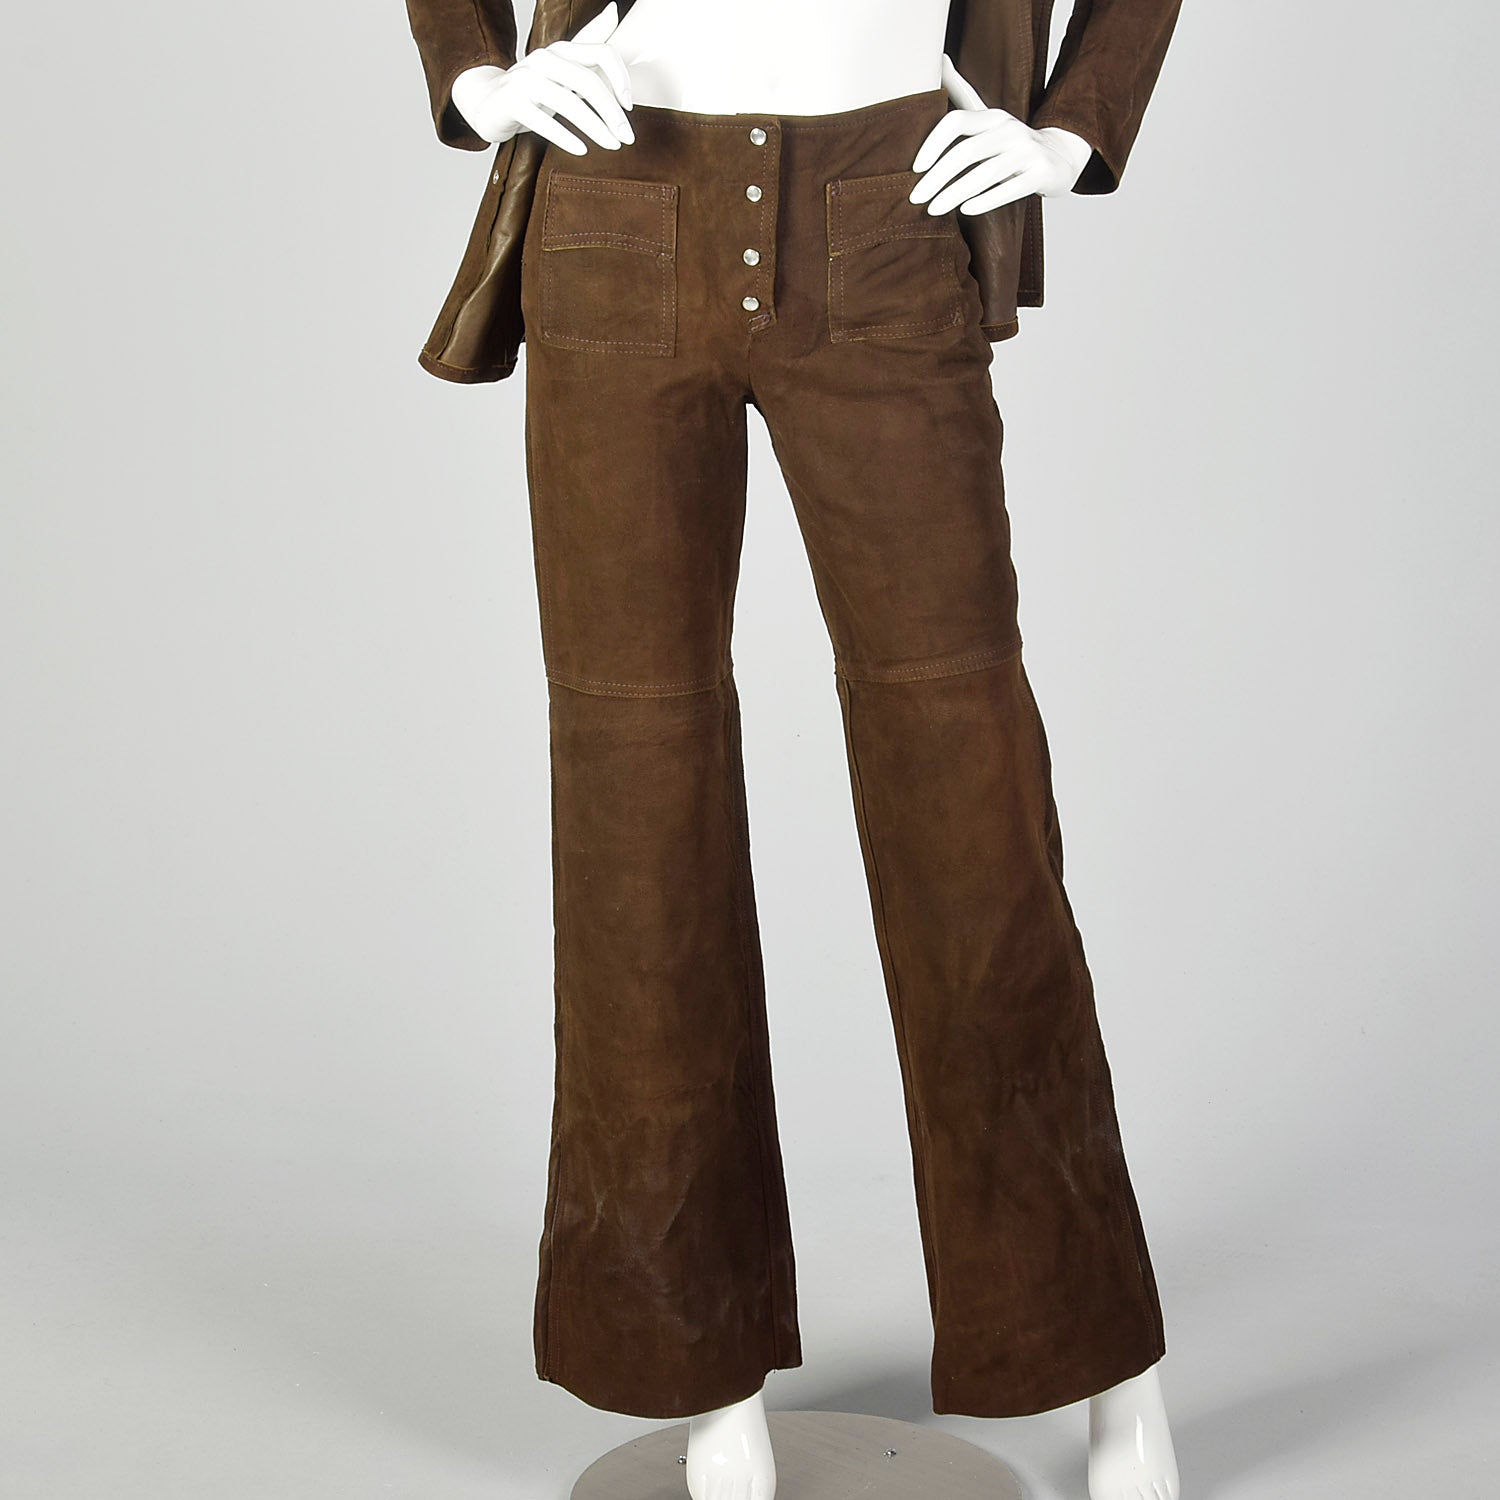 XXS 1970s Brown Suede Leather Top and Pants Set